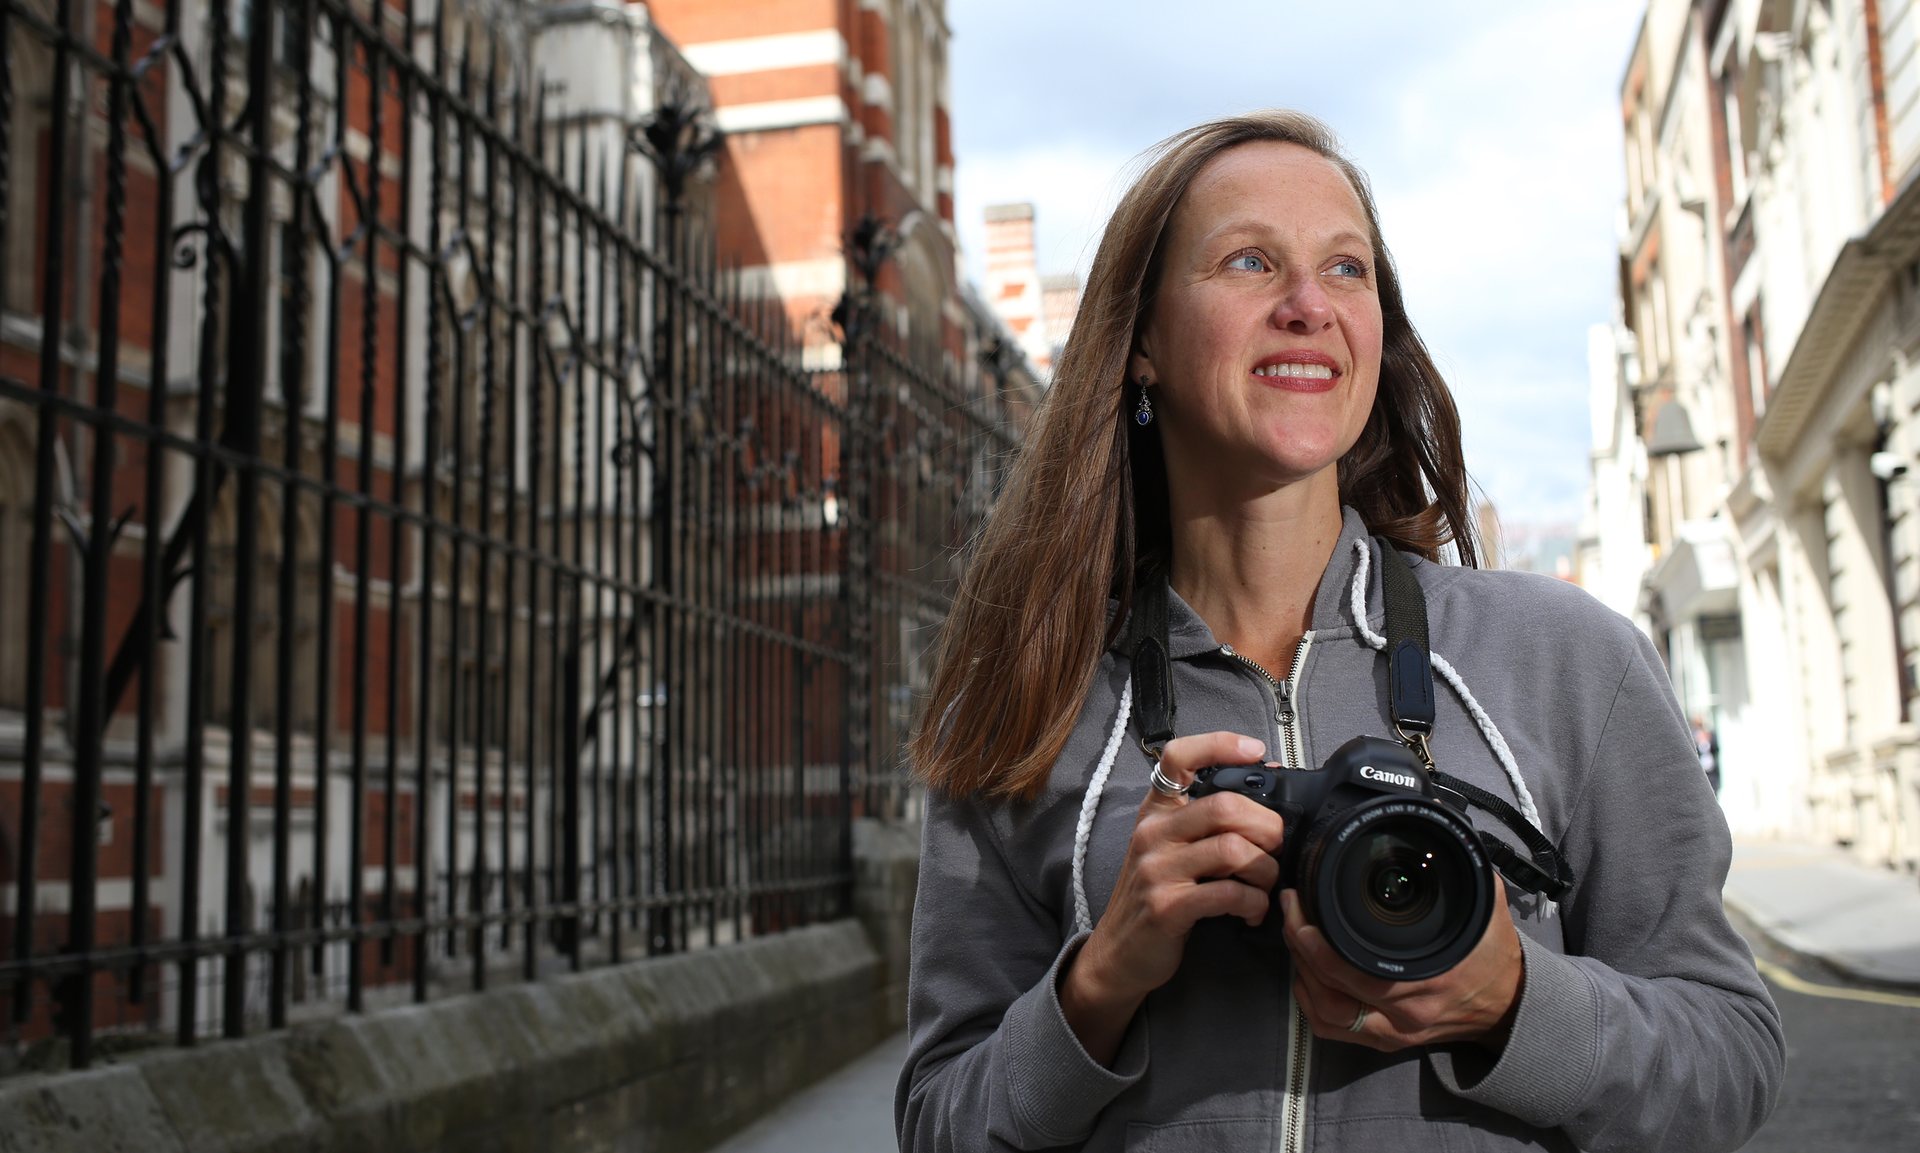 Suzanne Plunkett in London last year. Photograph: Dan Kitwood/Getty images